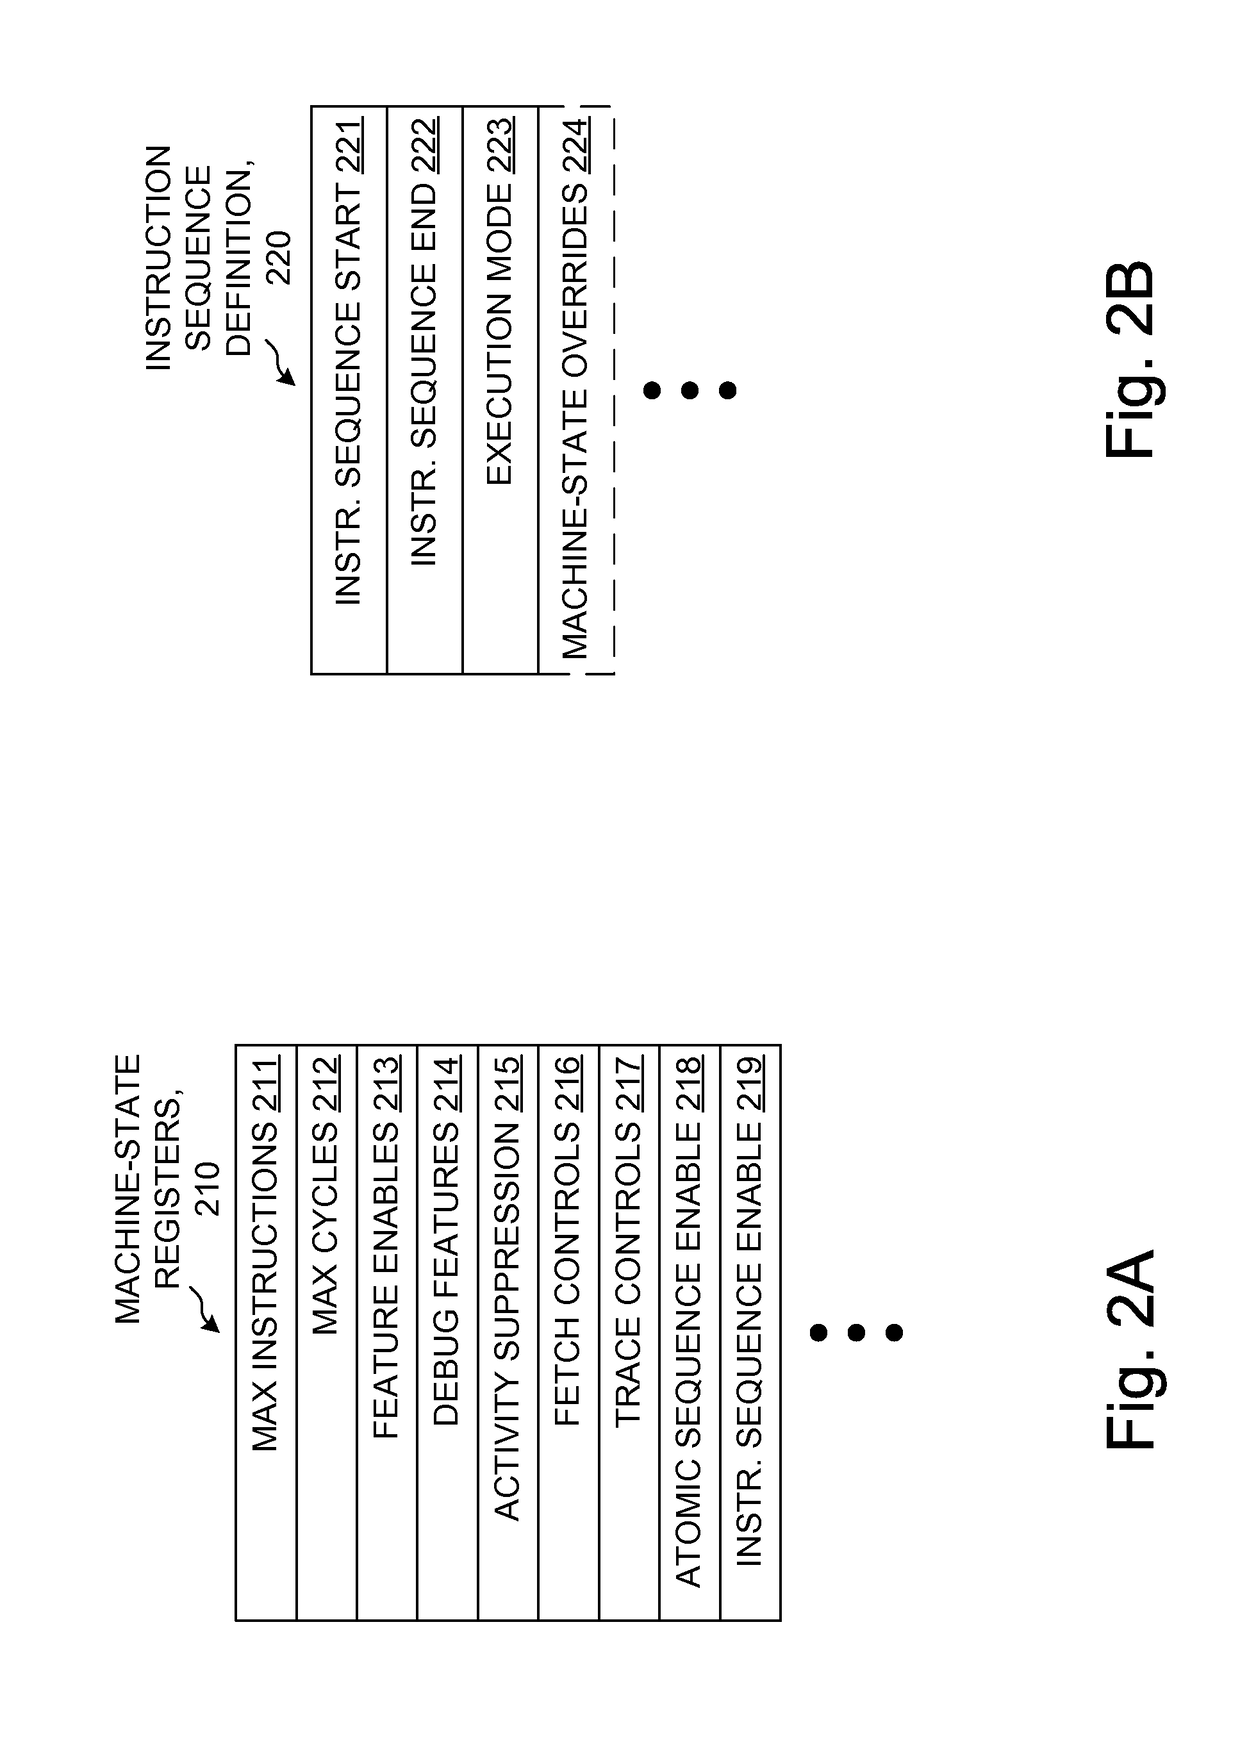 Controlling operation of a processor according to execution mode of an instruction sequence